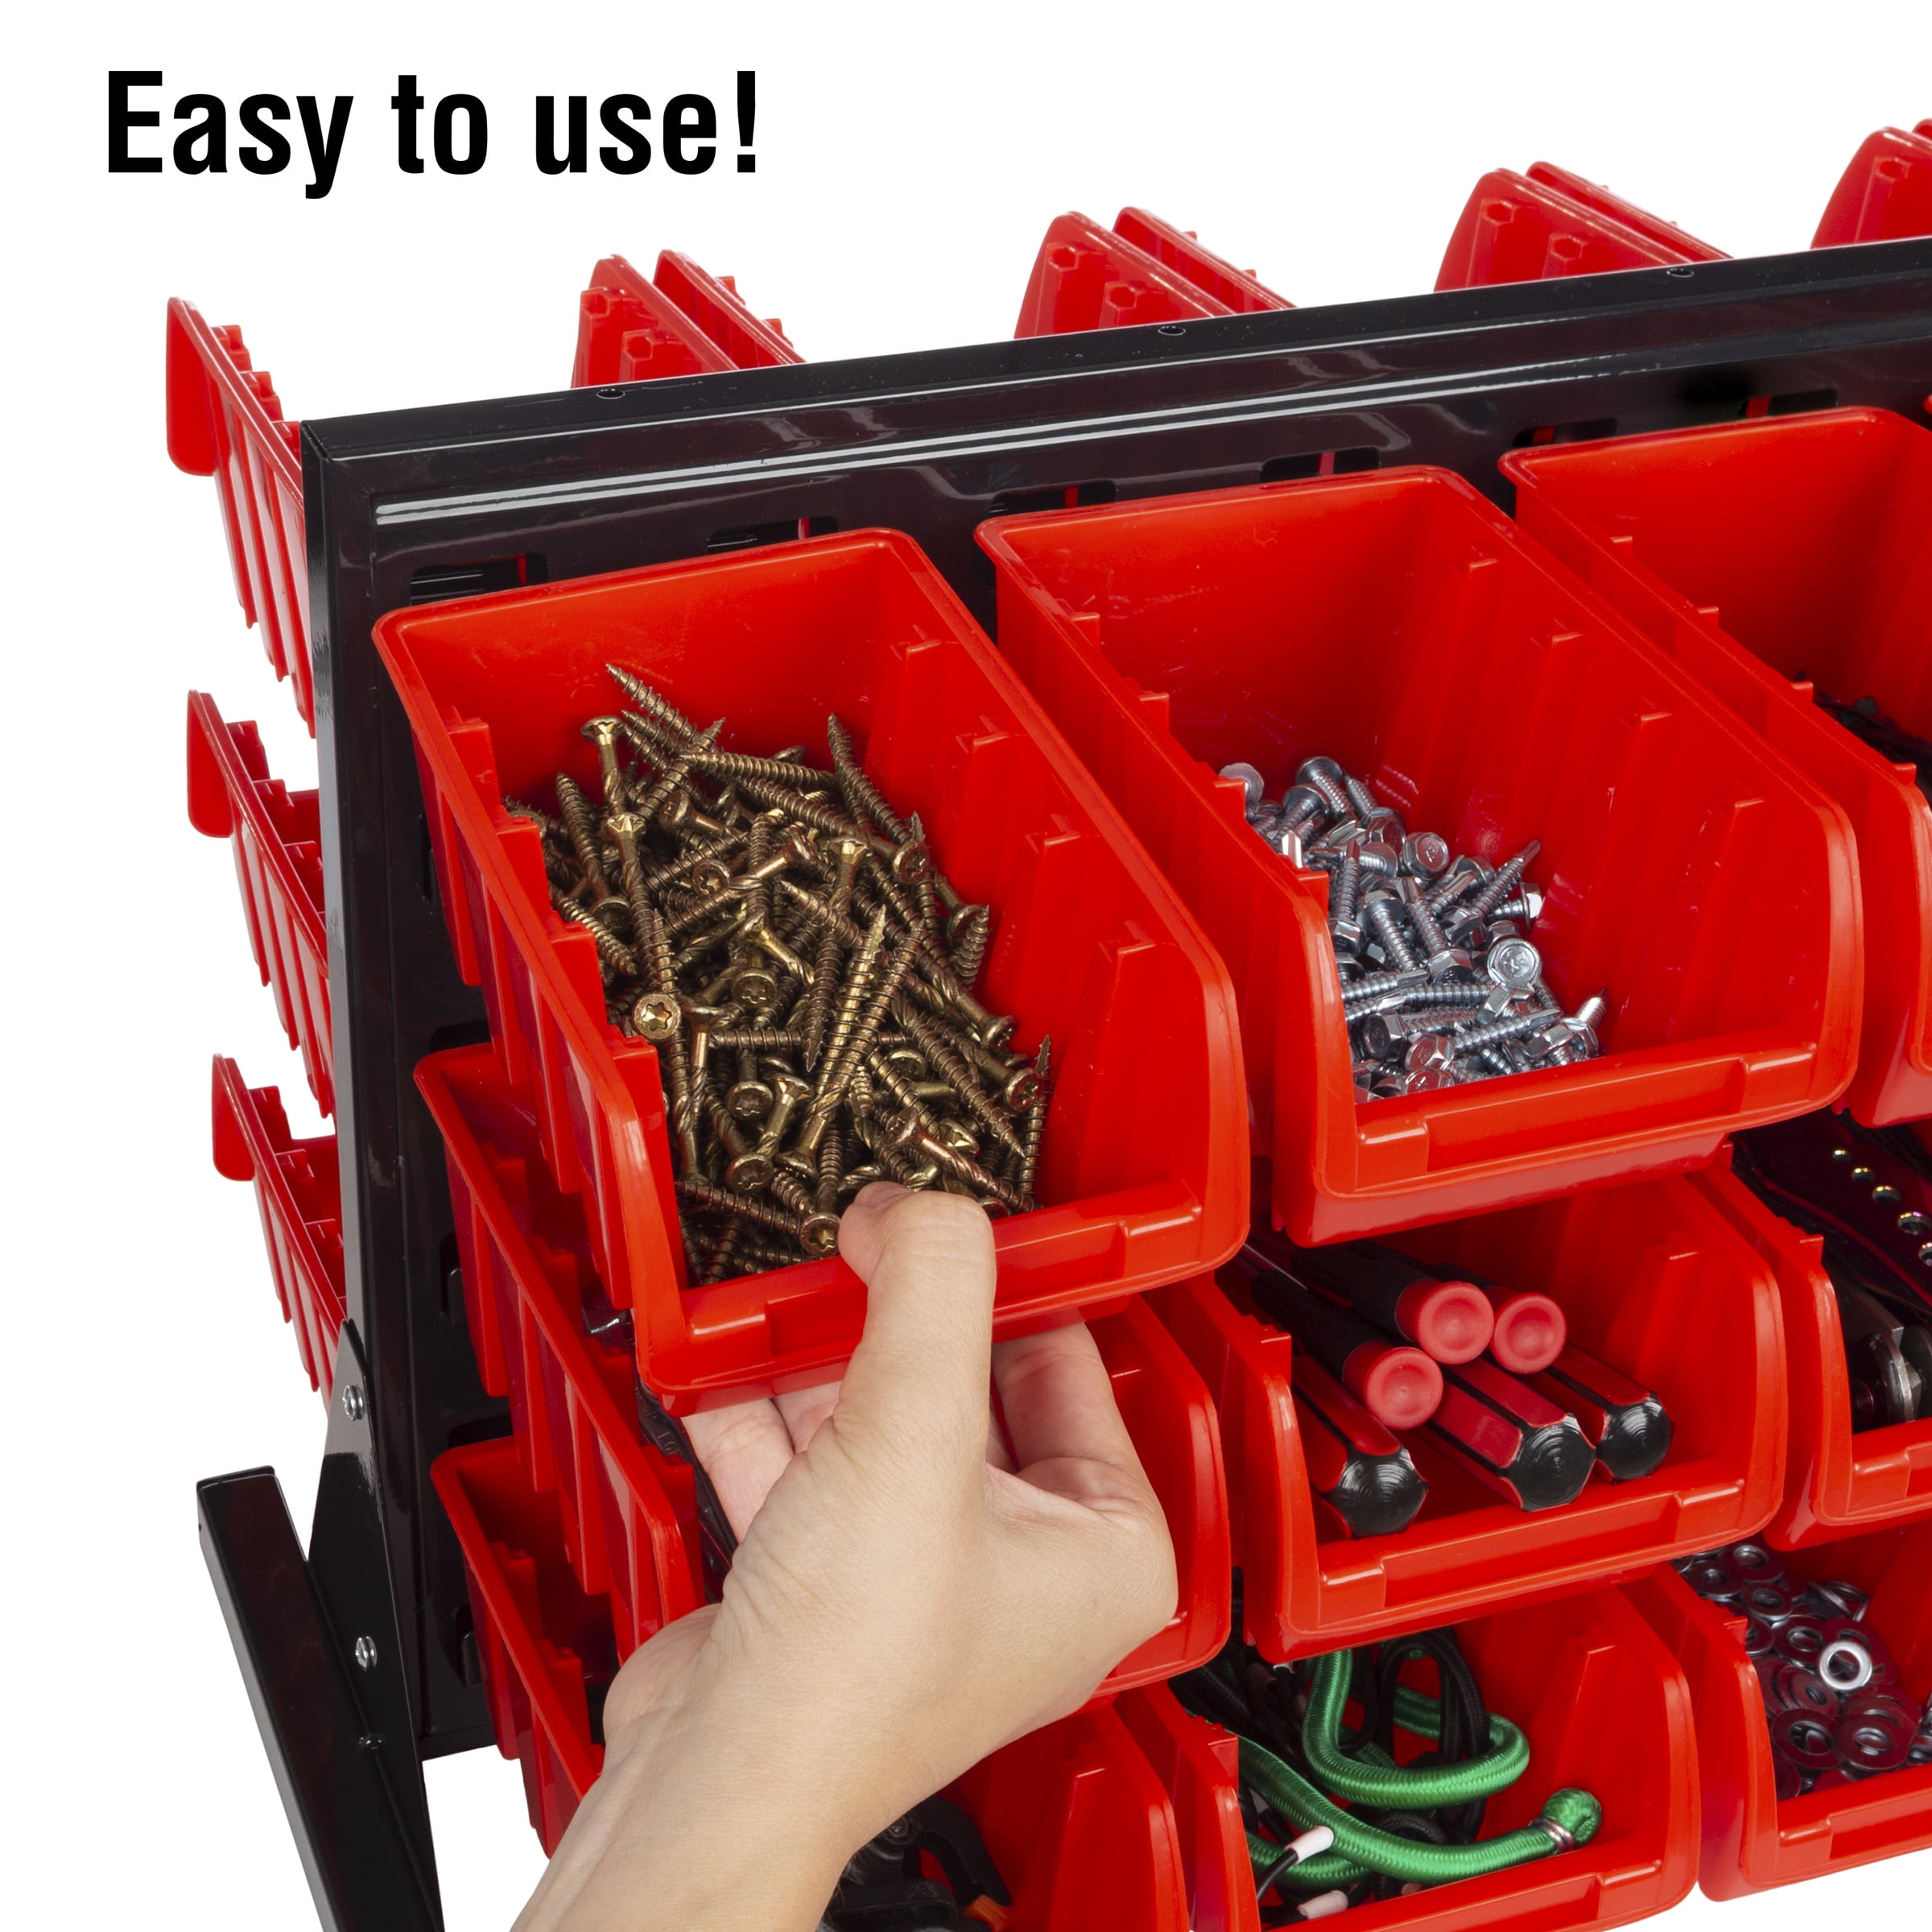 47 Bin Tool Organizer ? Wall Mountable Container With Removable Drawers For  Garage Organization And Storage By Stalwart (red/blue) : Target